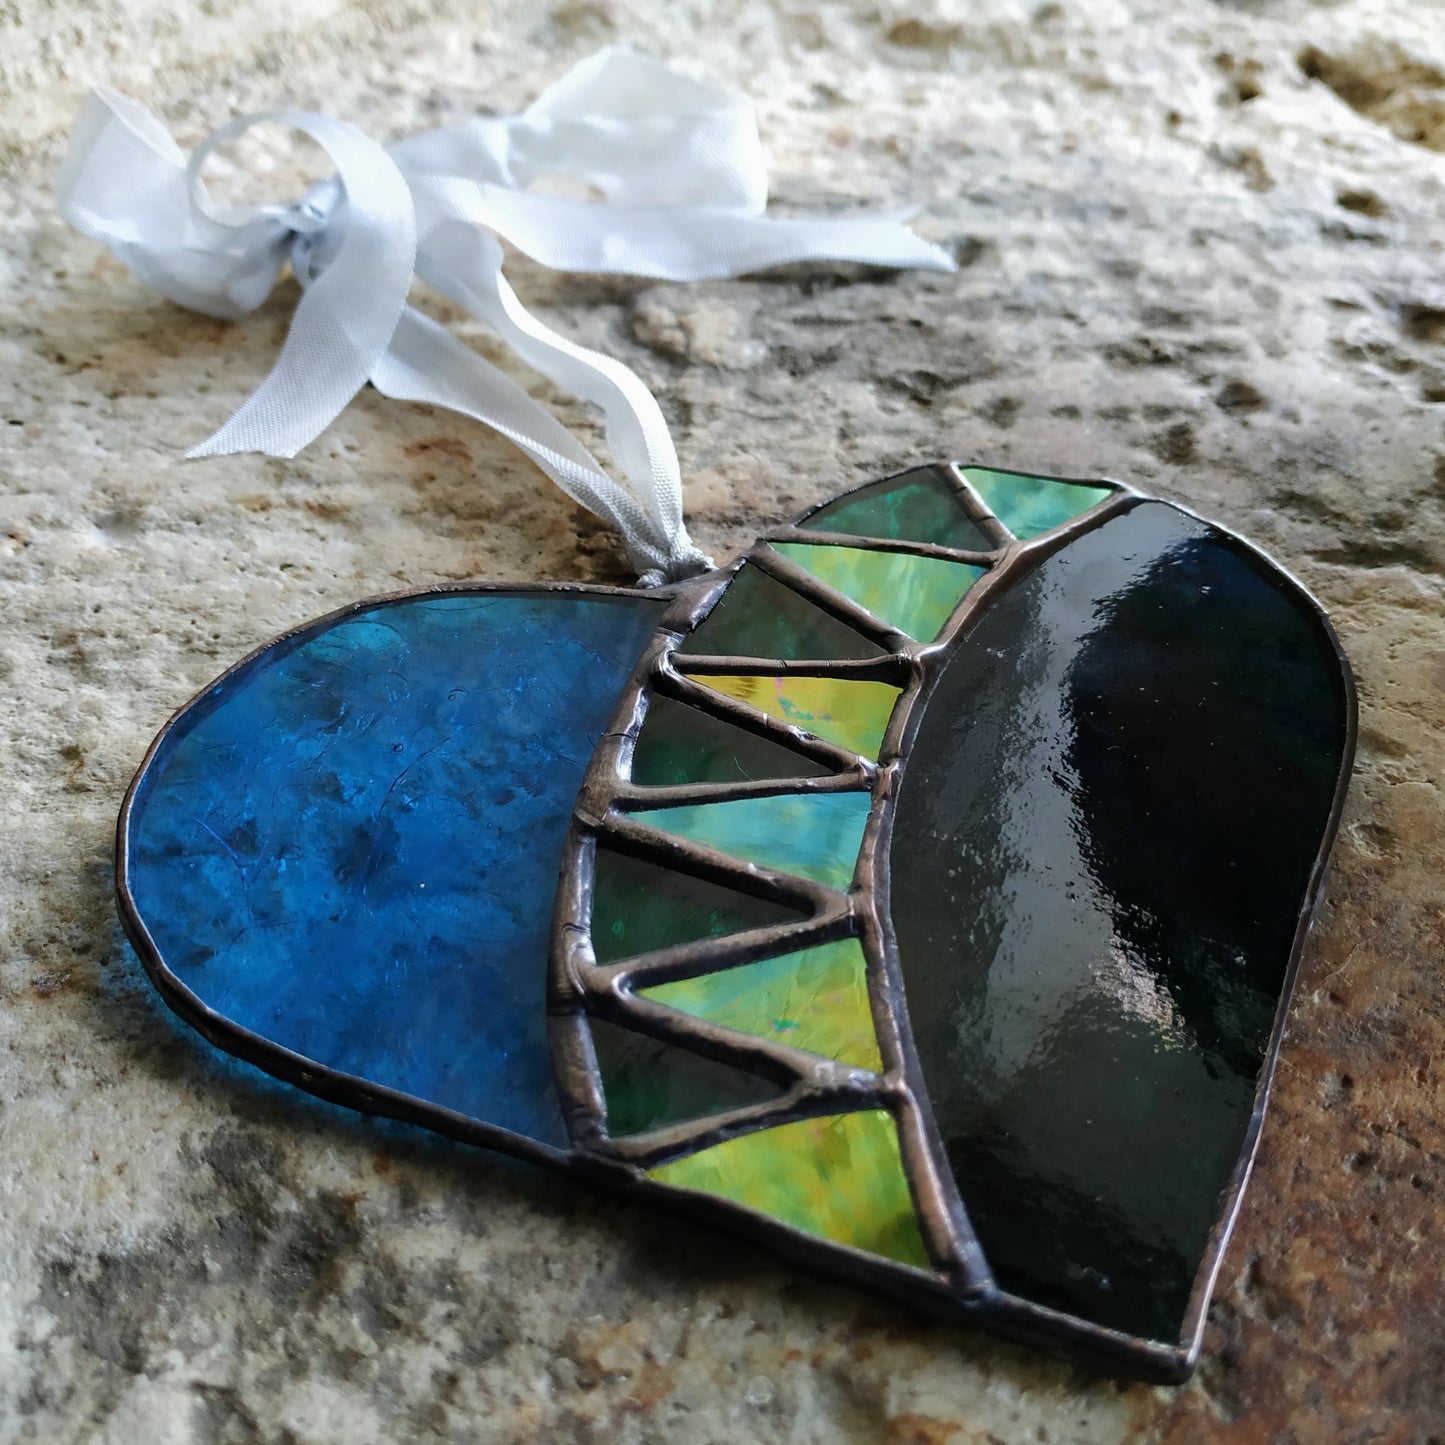 Medieval style stained glass heart lying on stone, handmade by Pamela Angus 